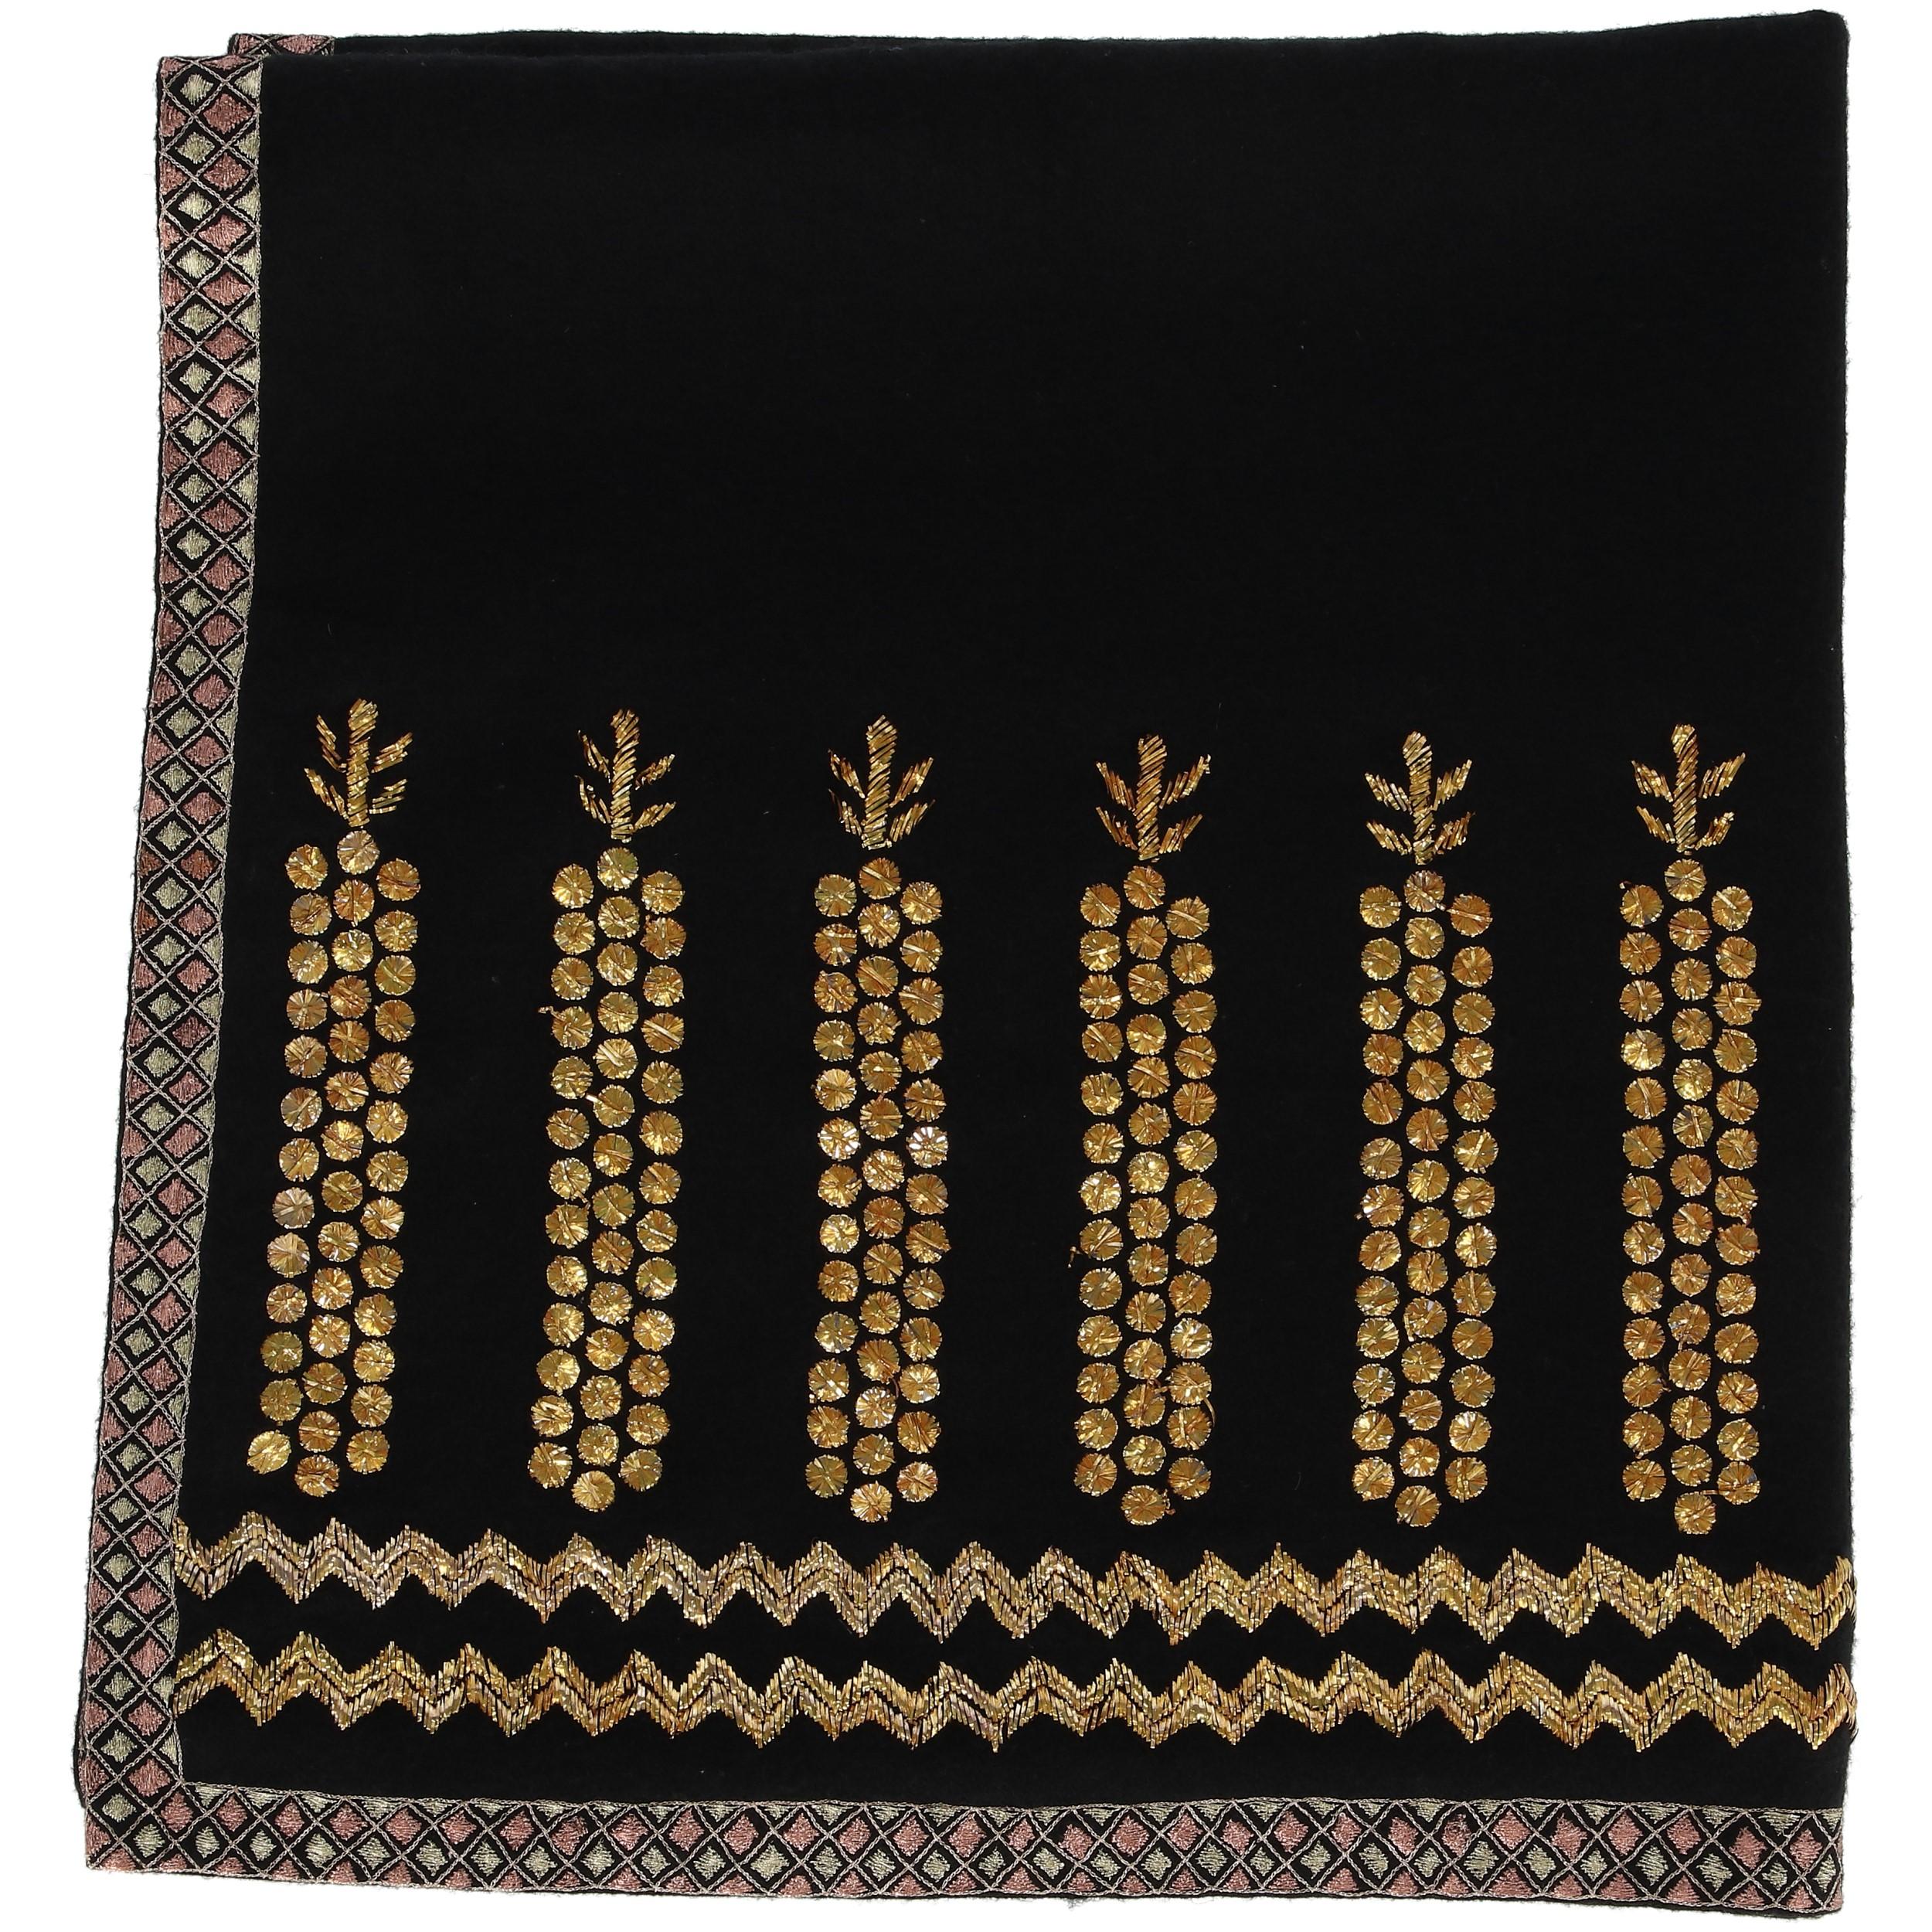 Dires Van Noten stole in black wool embroidered in gold, pink and silver colors.

Years: 1990s

Made in Belgium

Length: 178 cm
Width: 85 cm